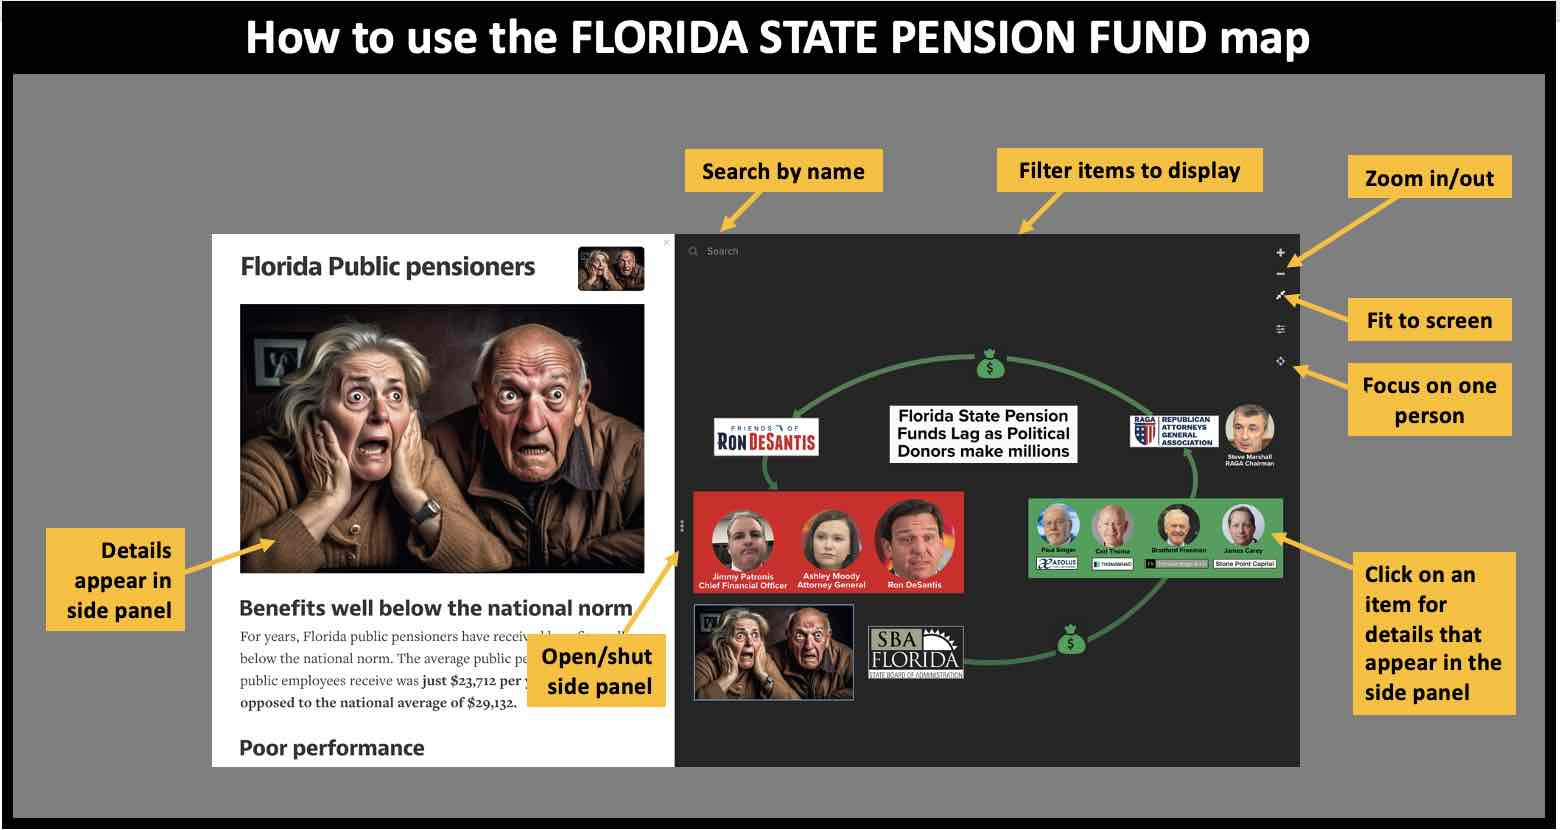 How to use the FLORIDA STATE PENSION FUND map